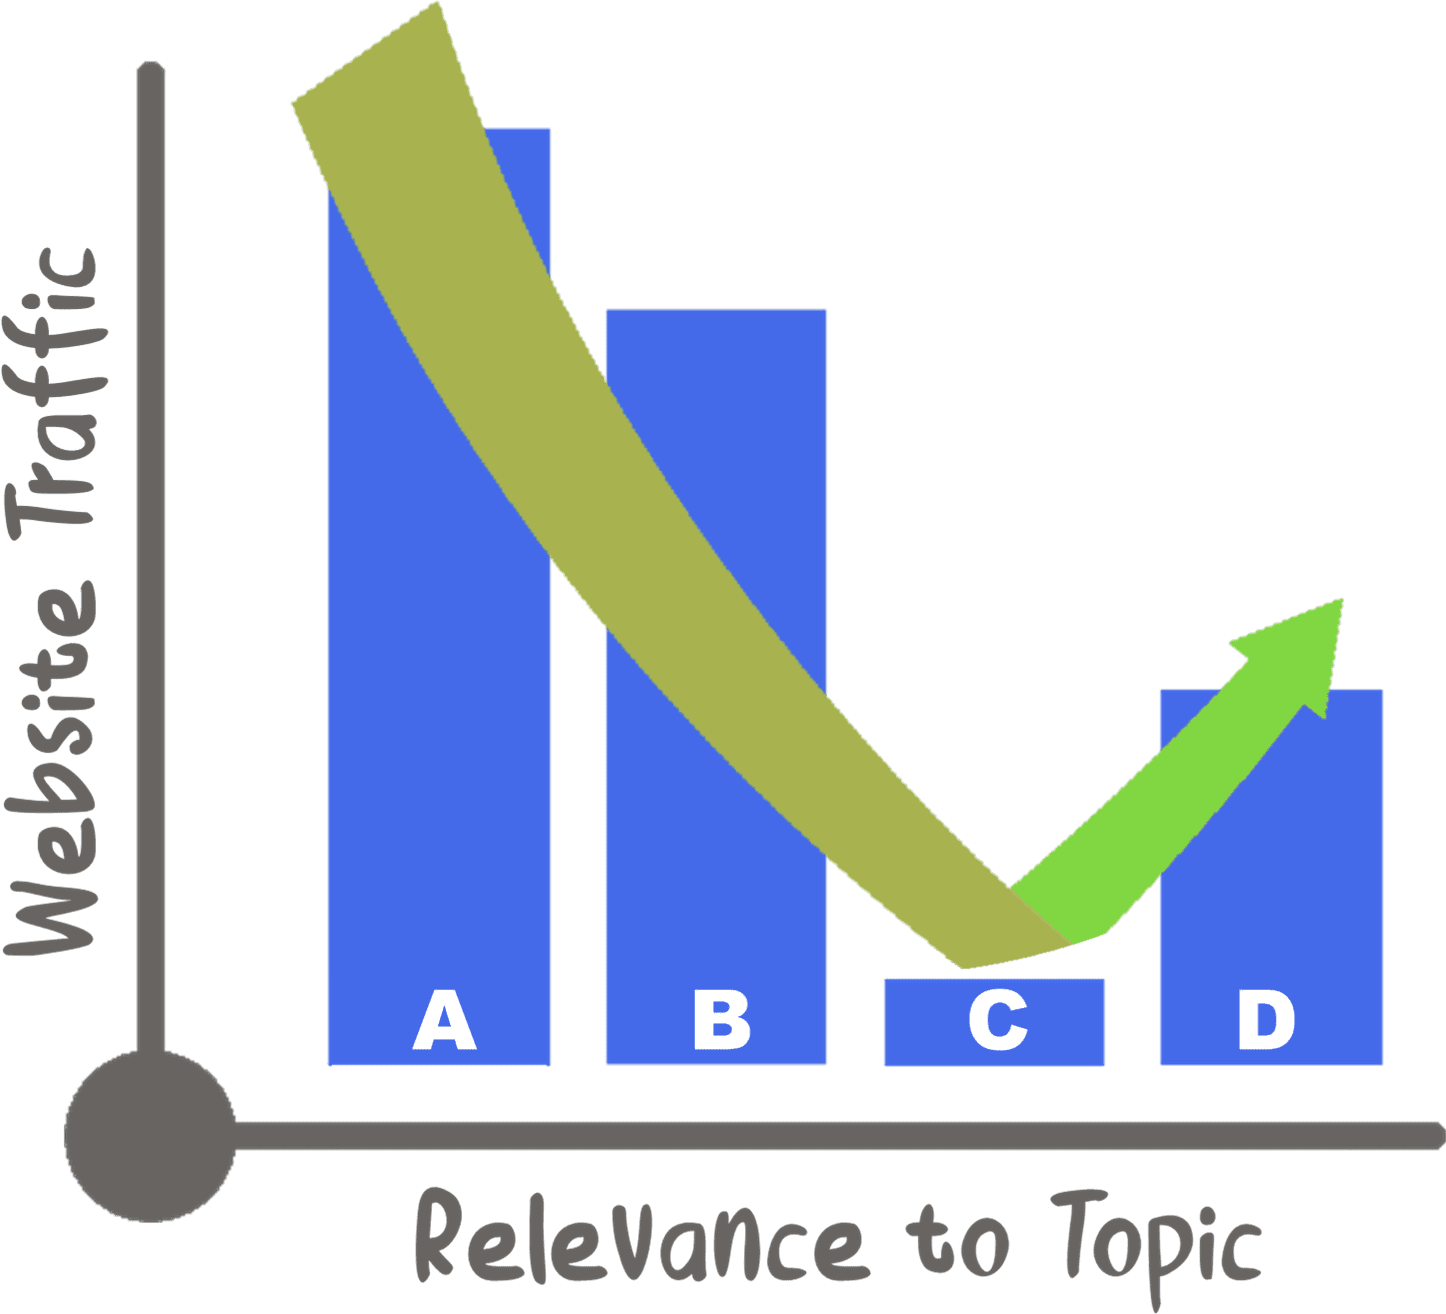 Bar graph plotting Website Traffic with Relevance to Topic. Column A is tallest. Column B is a bit shorter. Column C drops to bottom. Column D climbs back up. Green arrow shows the path the height of the columns takes.